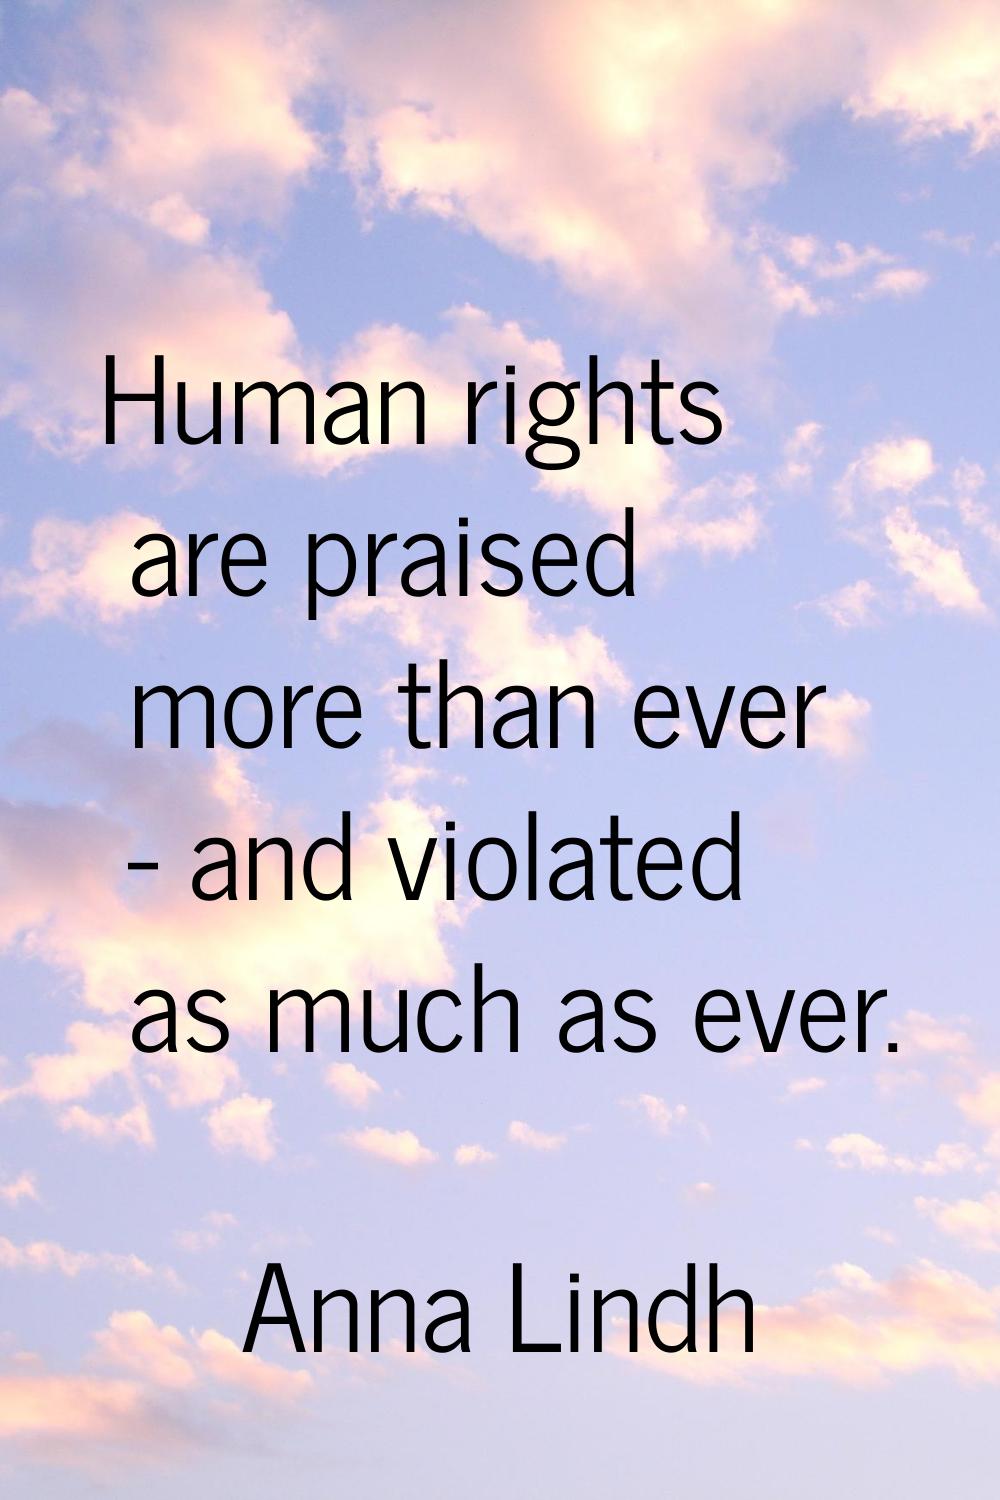 Human rights are praised more than ever - and violated as much as ever.